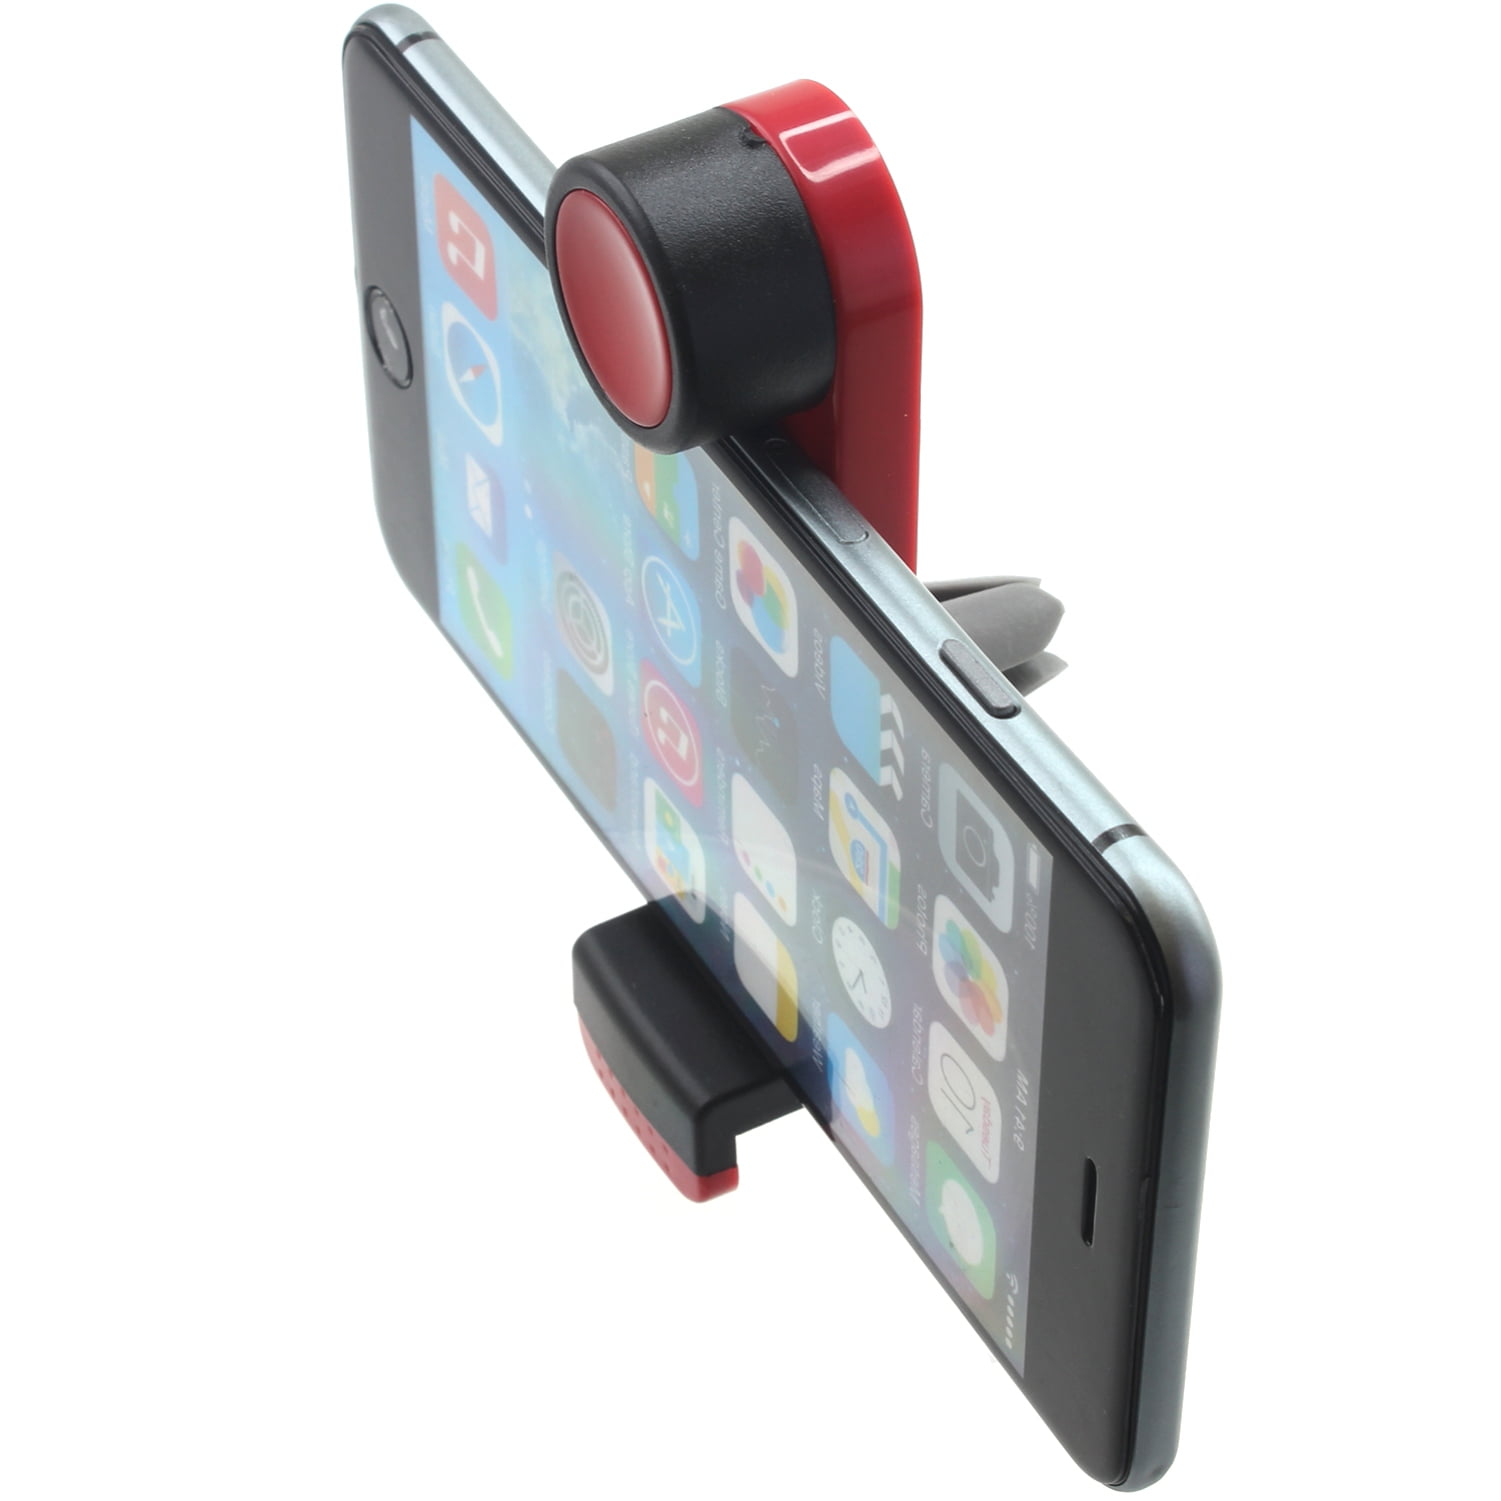 Air Vent Car Mount for Samsung Galaxy Z Fold4 Phone - Holder Swivel Cradle Strong Grip Compatible With Z Fold4 Model - Walmart.com